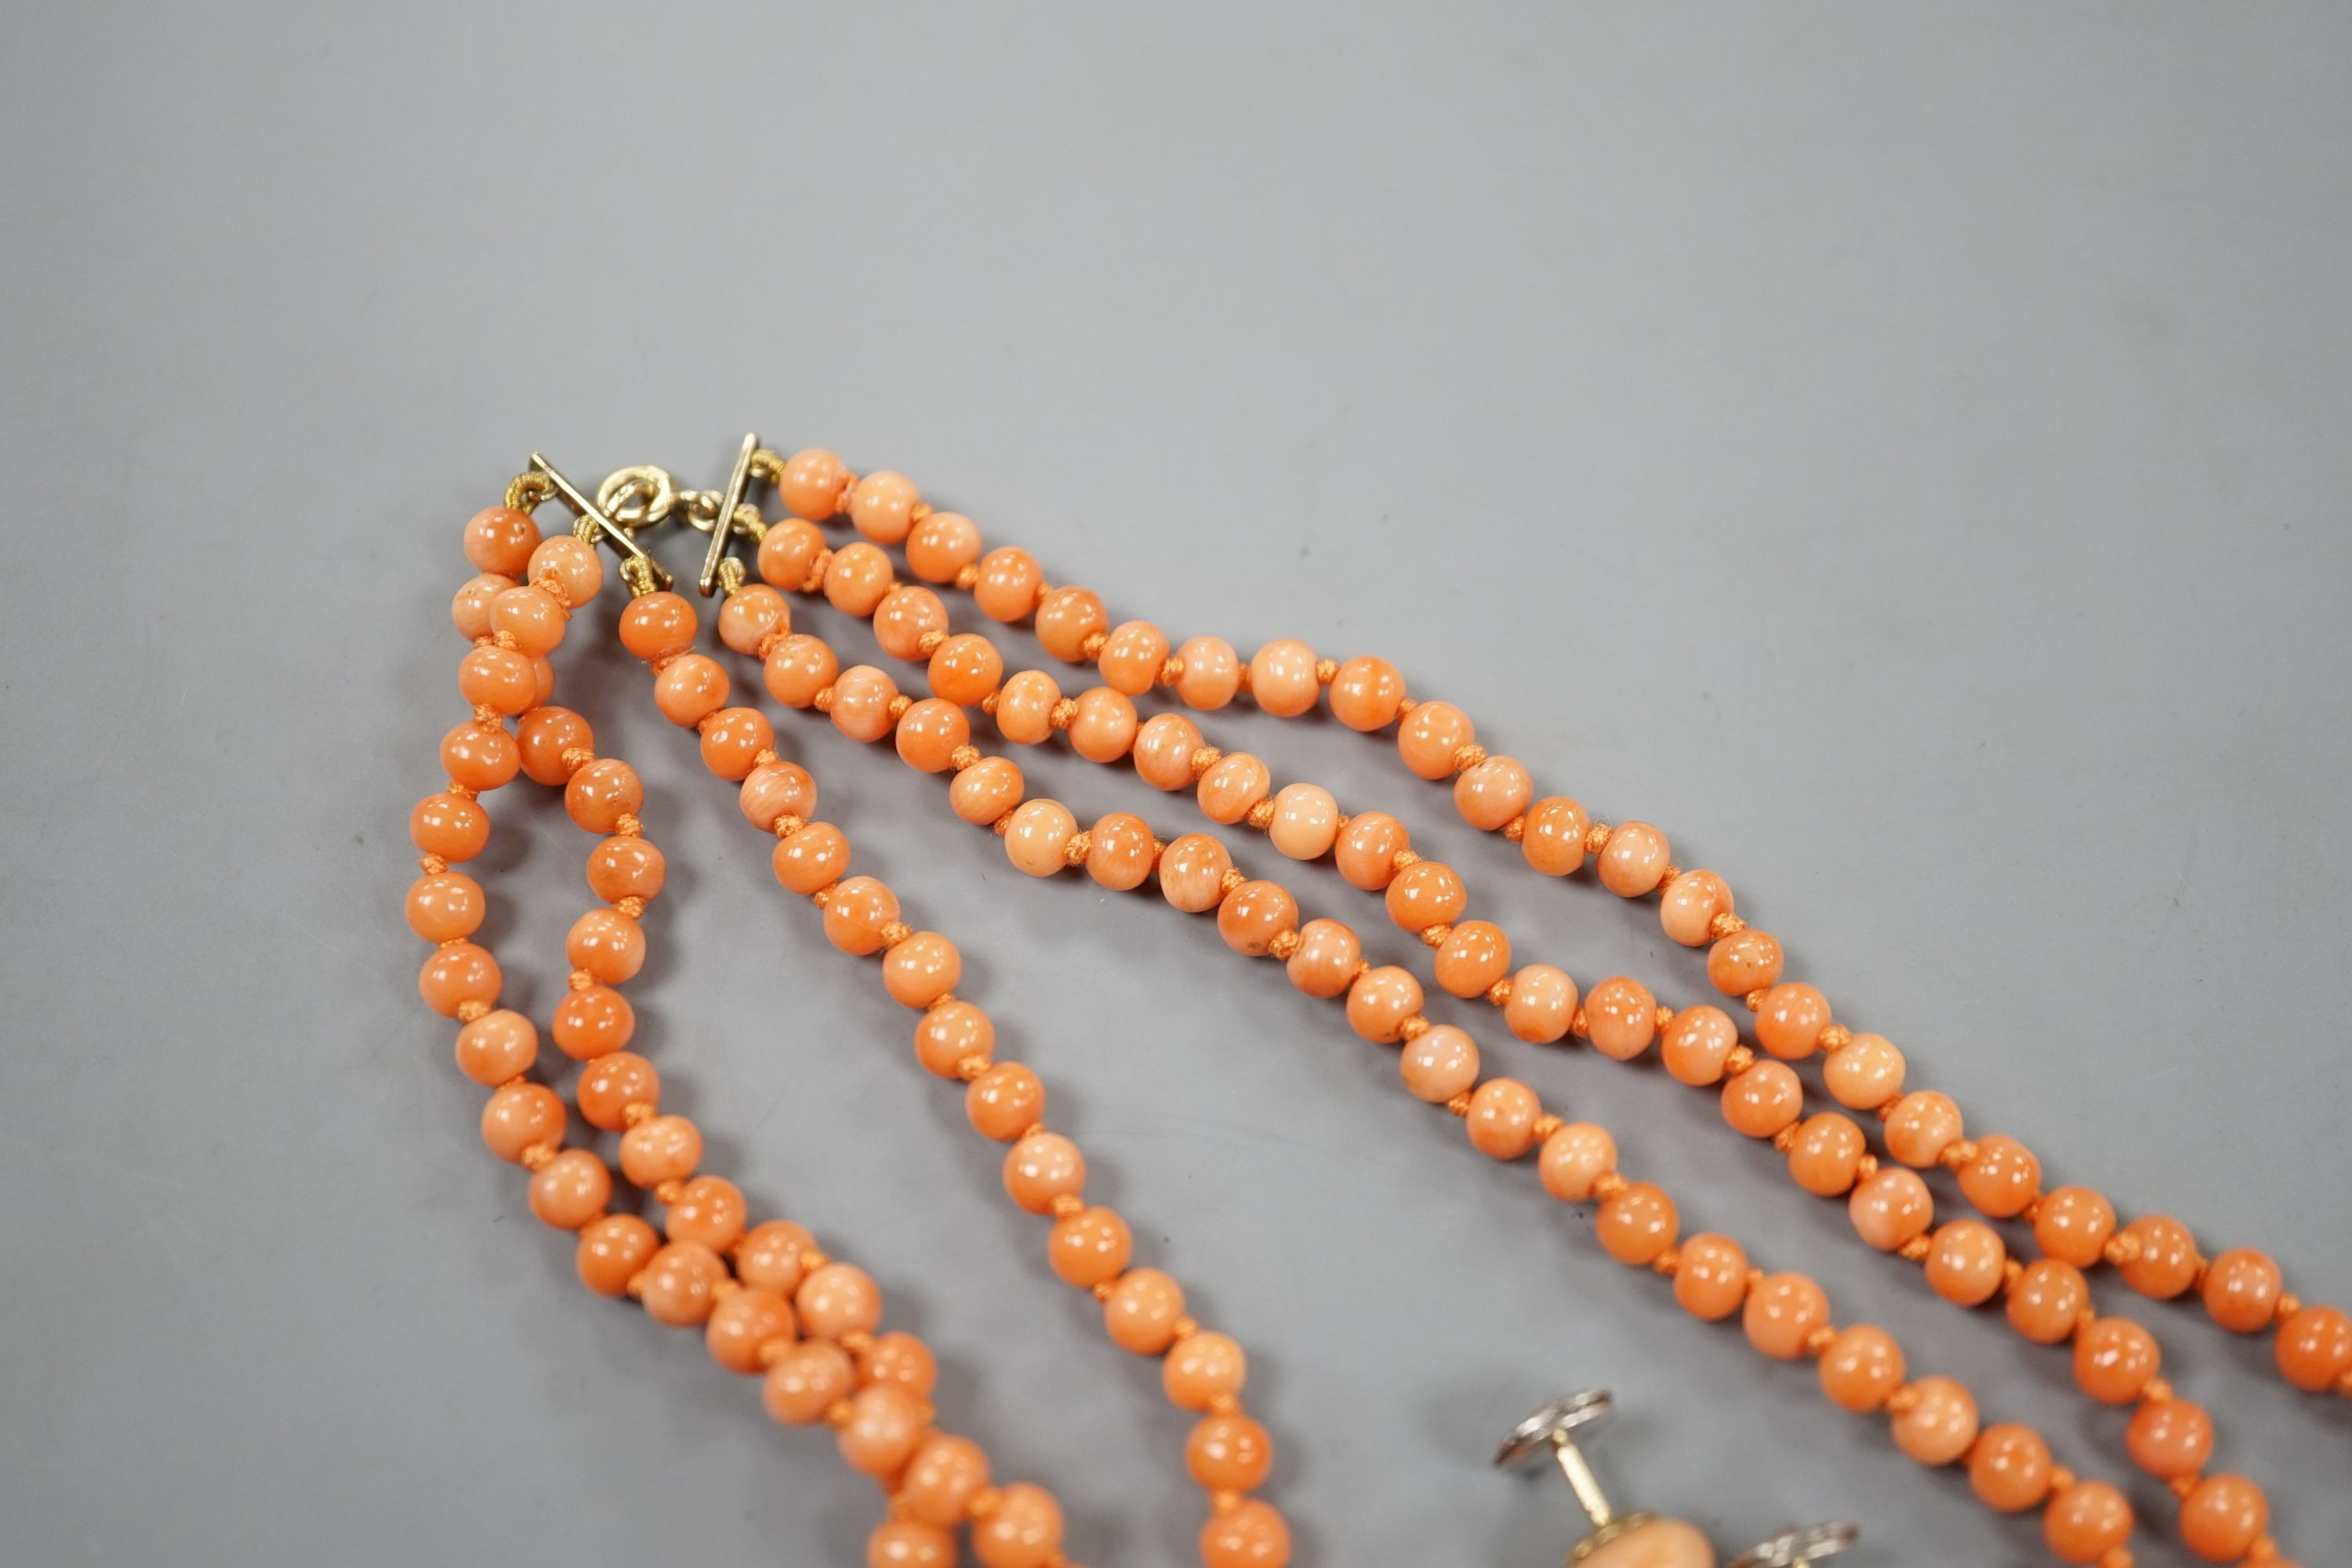 A triple strand coral bead necklace, 46cm and a pair of coral bead earrings.